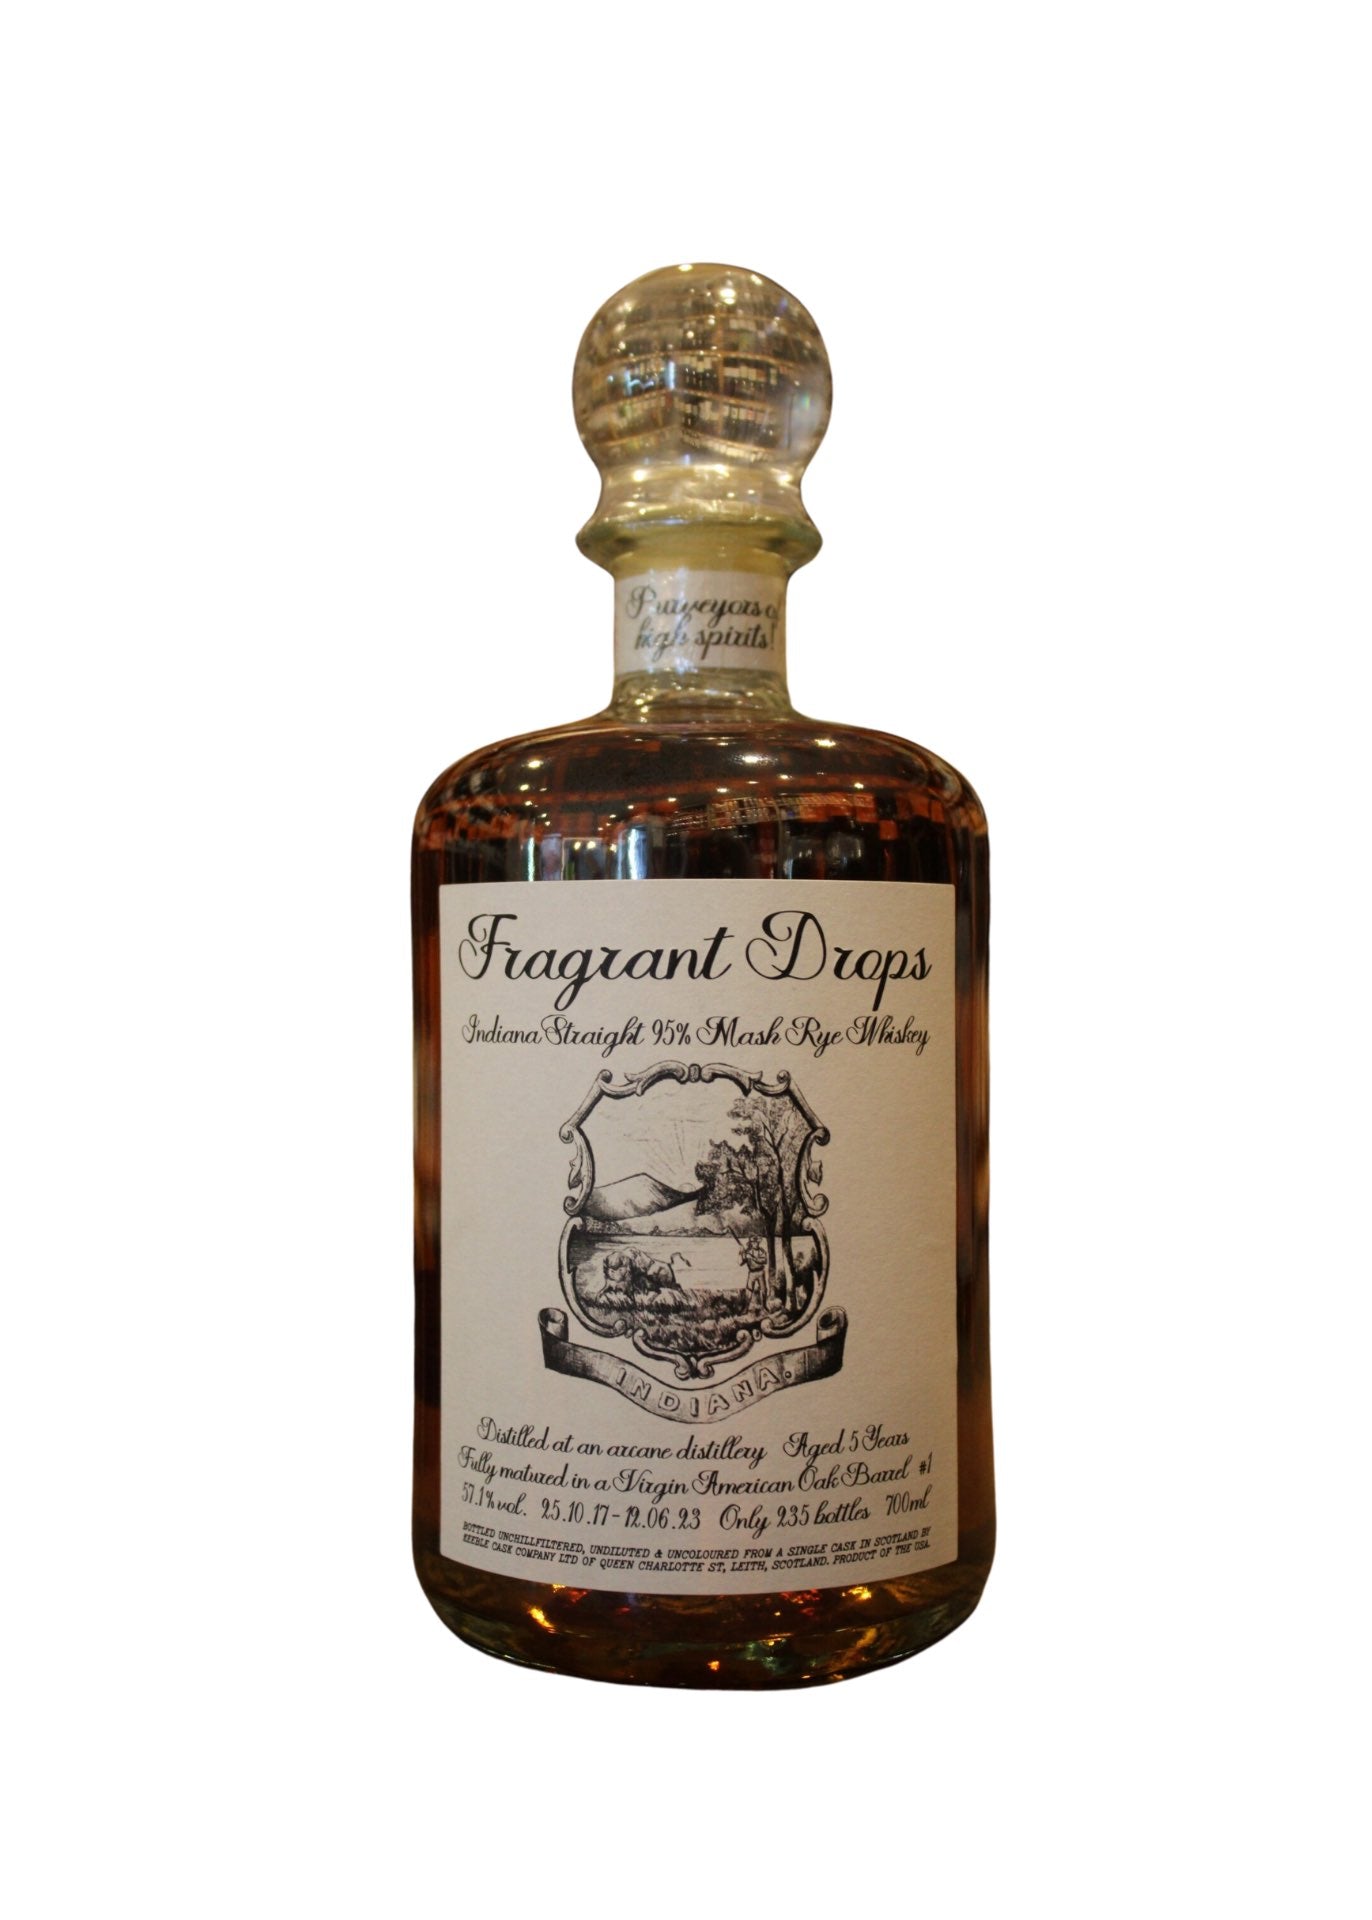 Fragrant Drops Indiana Straight Rye 5 Year Old, Charity Auction